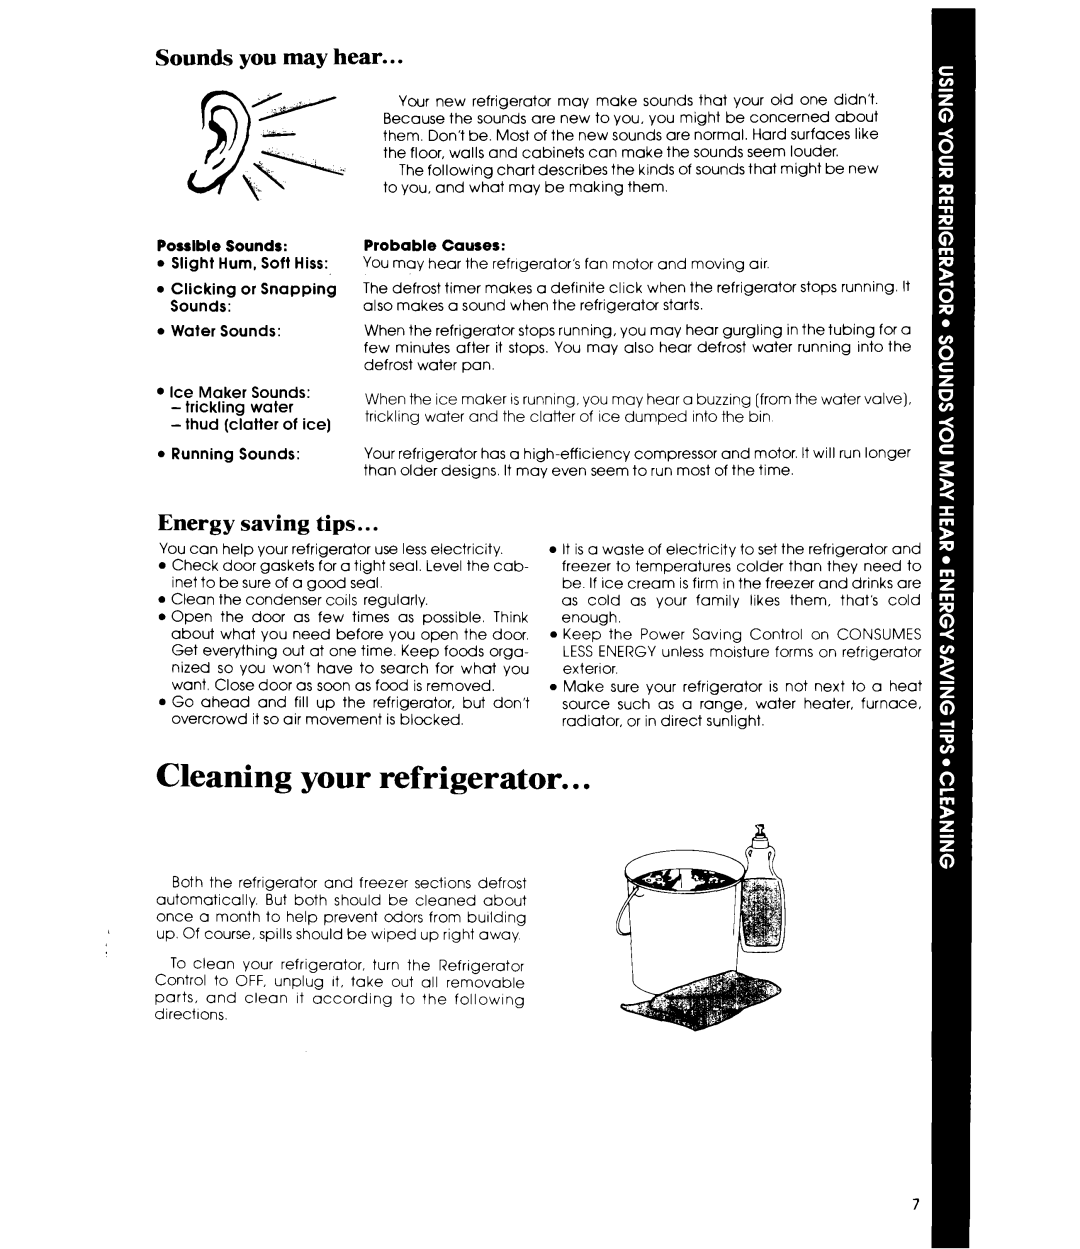 Whirlpool ETWM ws manual Cleaning your refrigerator, Energy saving tips 